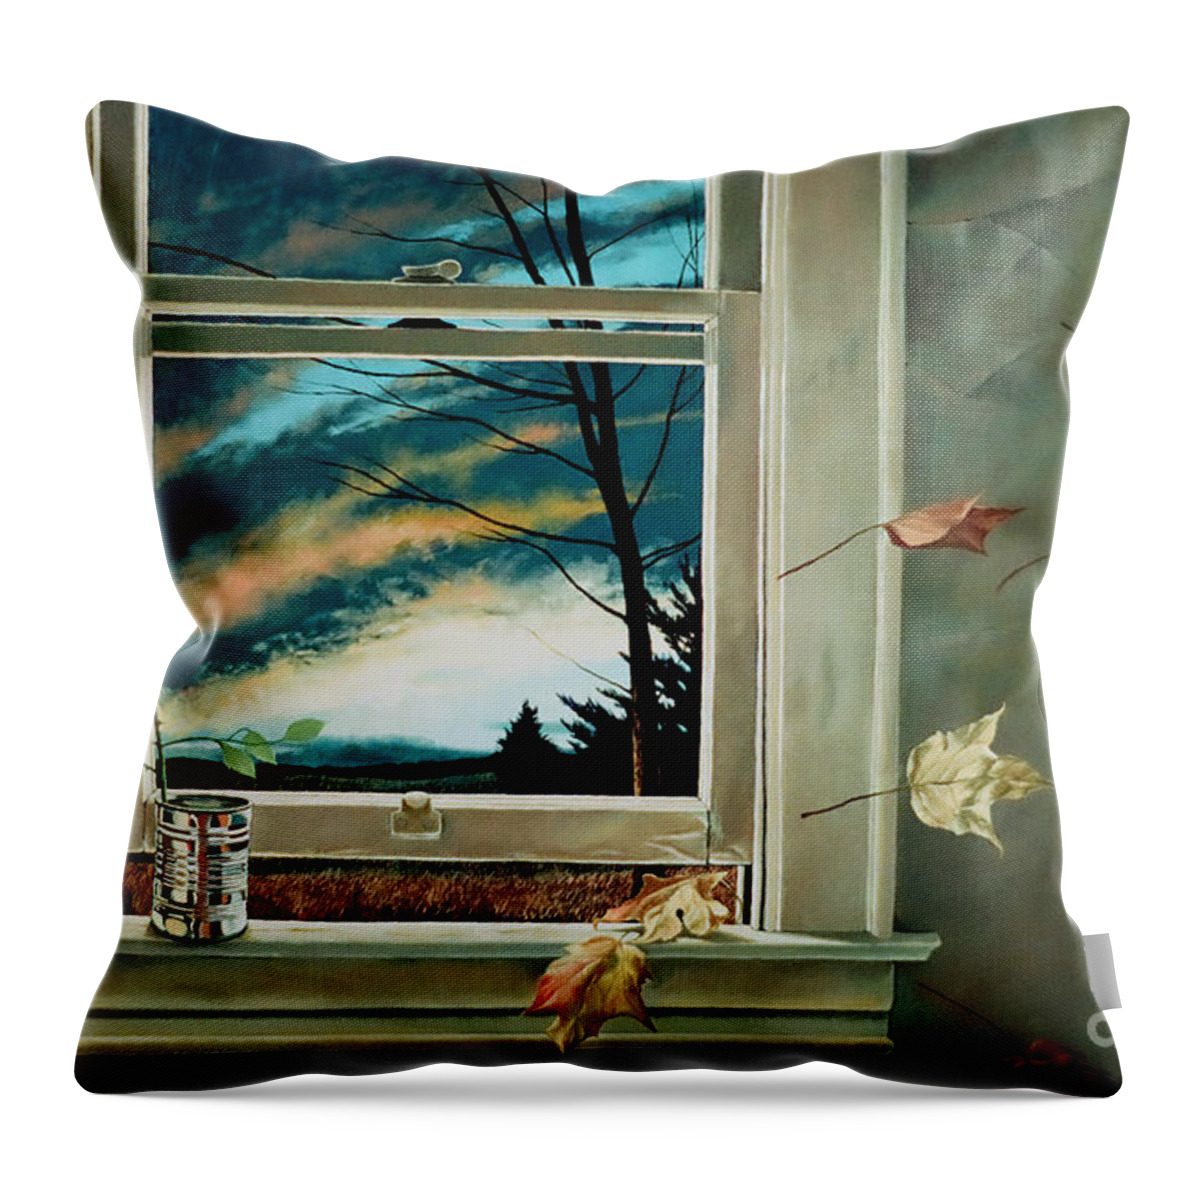 Autumn Throw Pillow featuring the painting September Breeze by Christopher Shellhammer